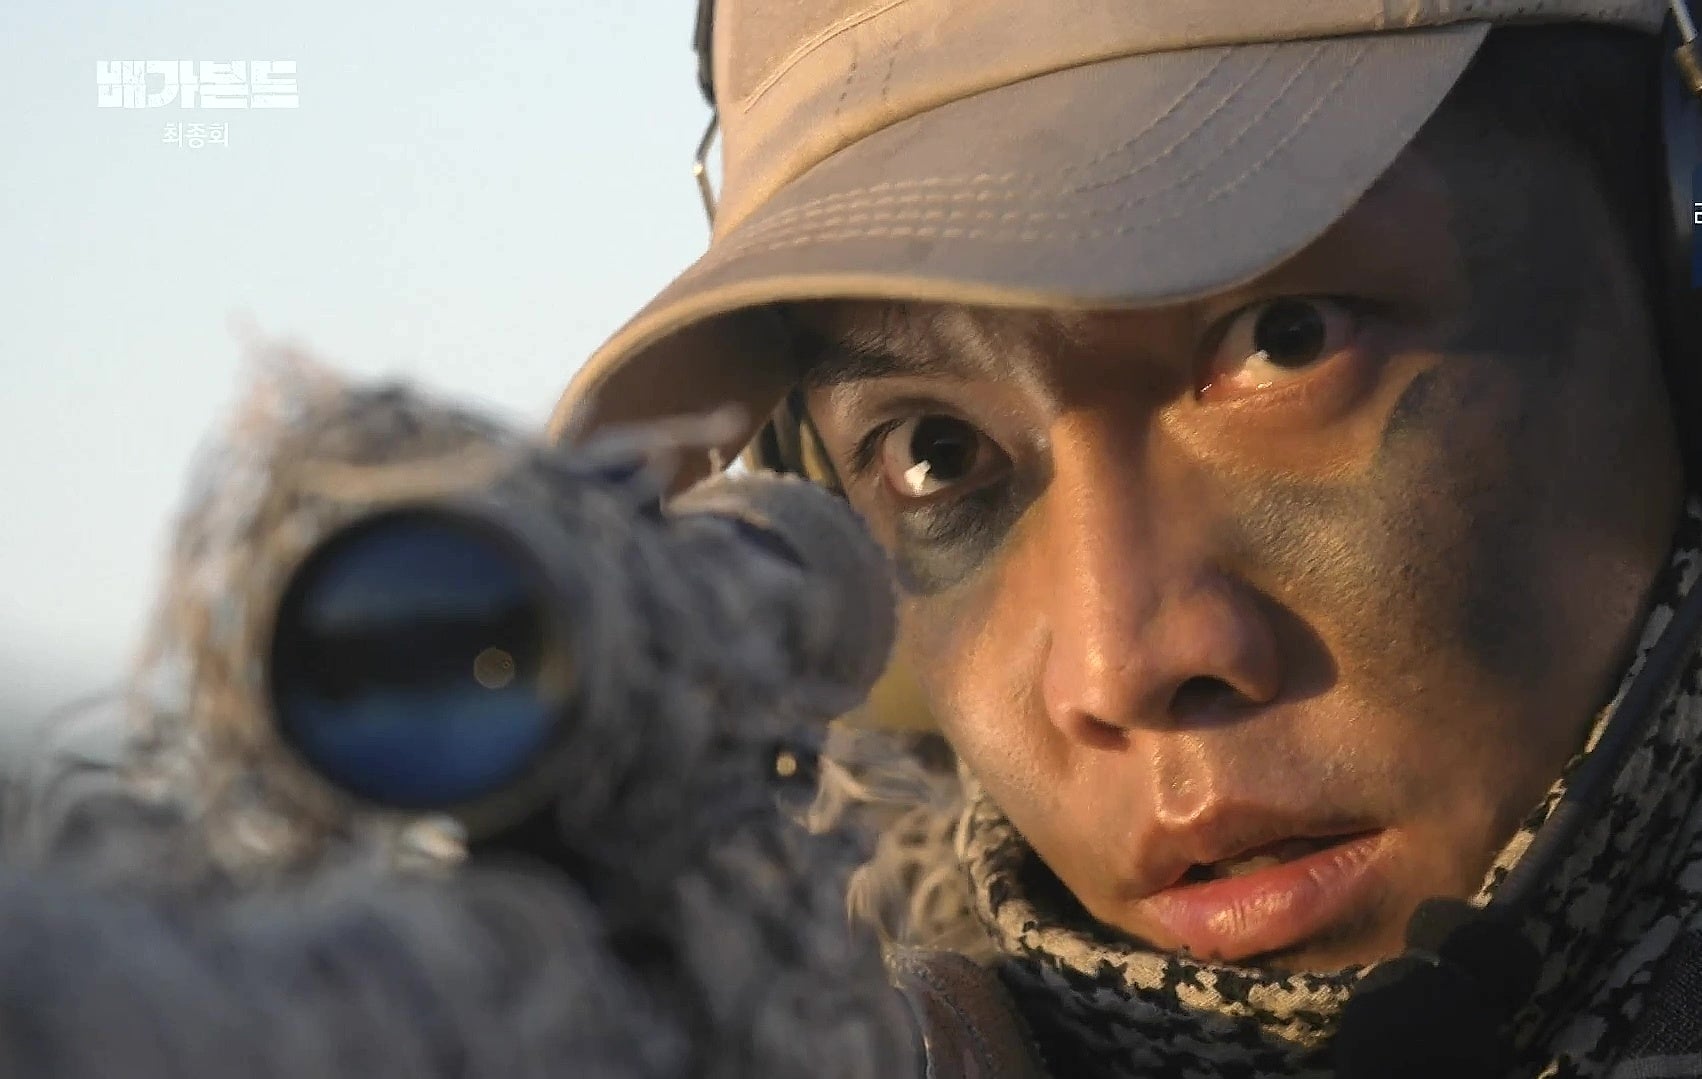 Close-up of a person in camouflage aiming a camera, expression focused